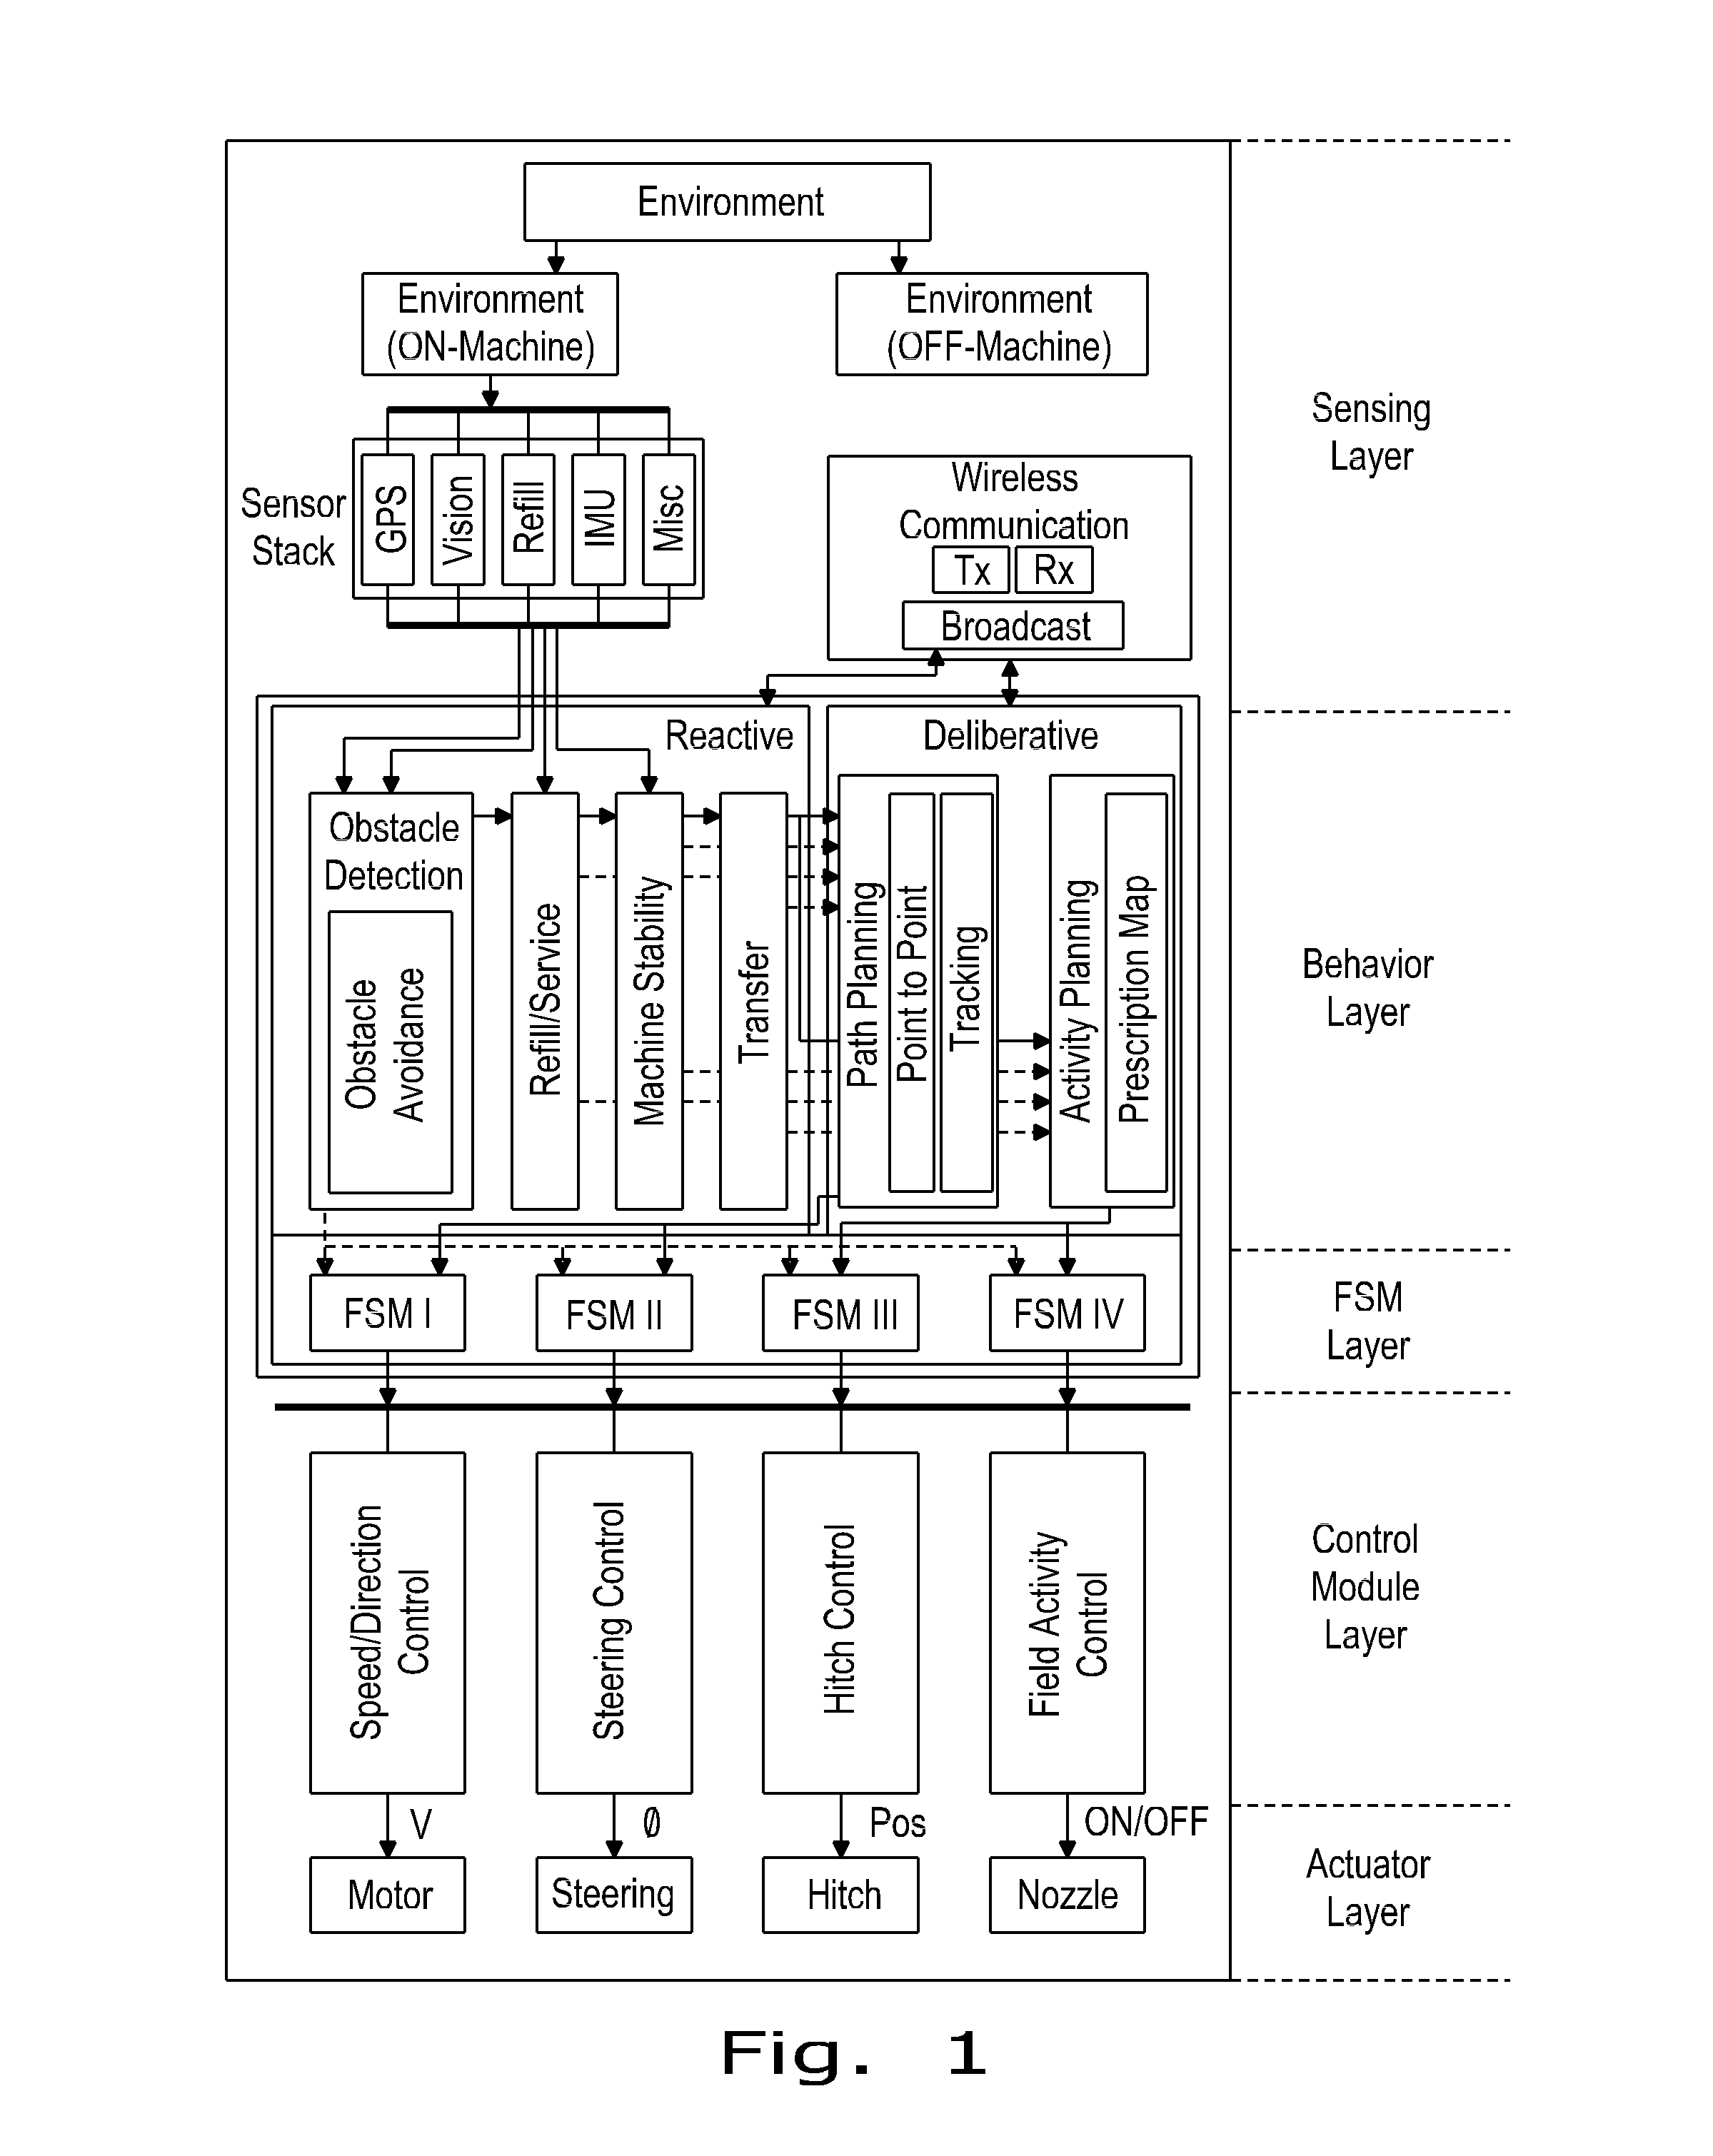 Control architecture for multi-robot system